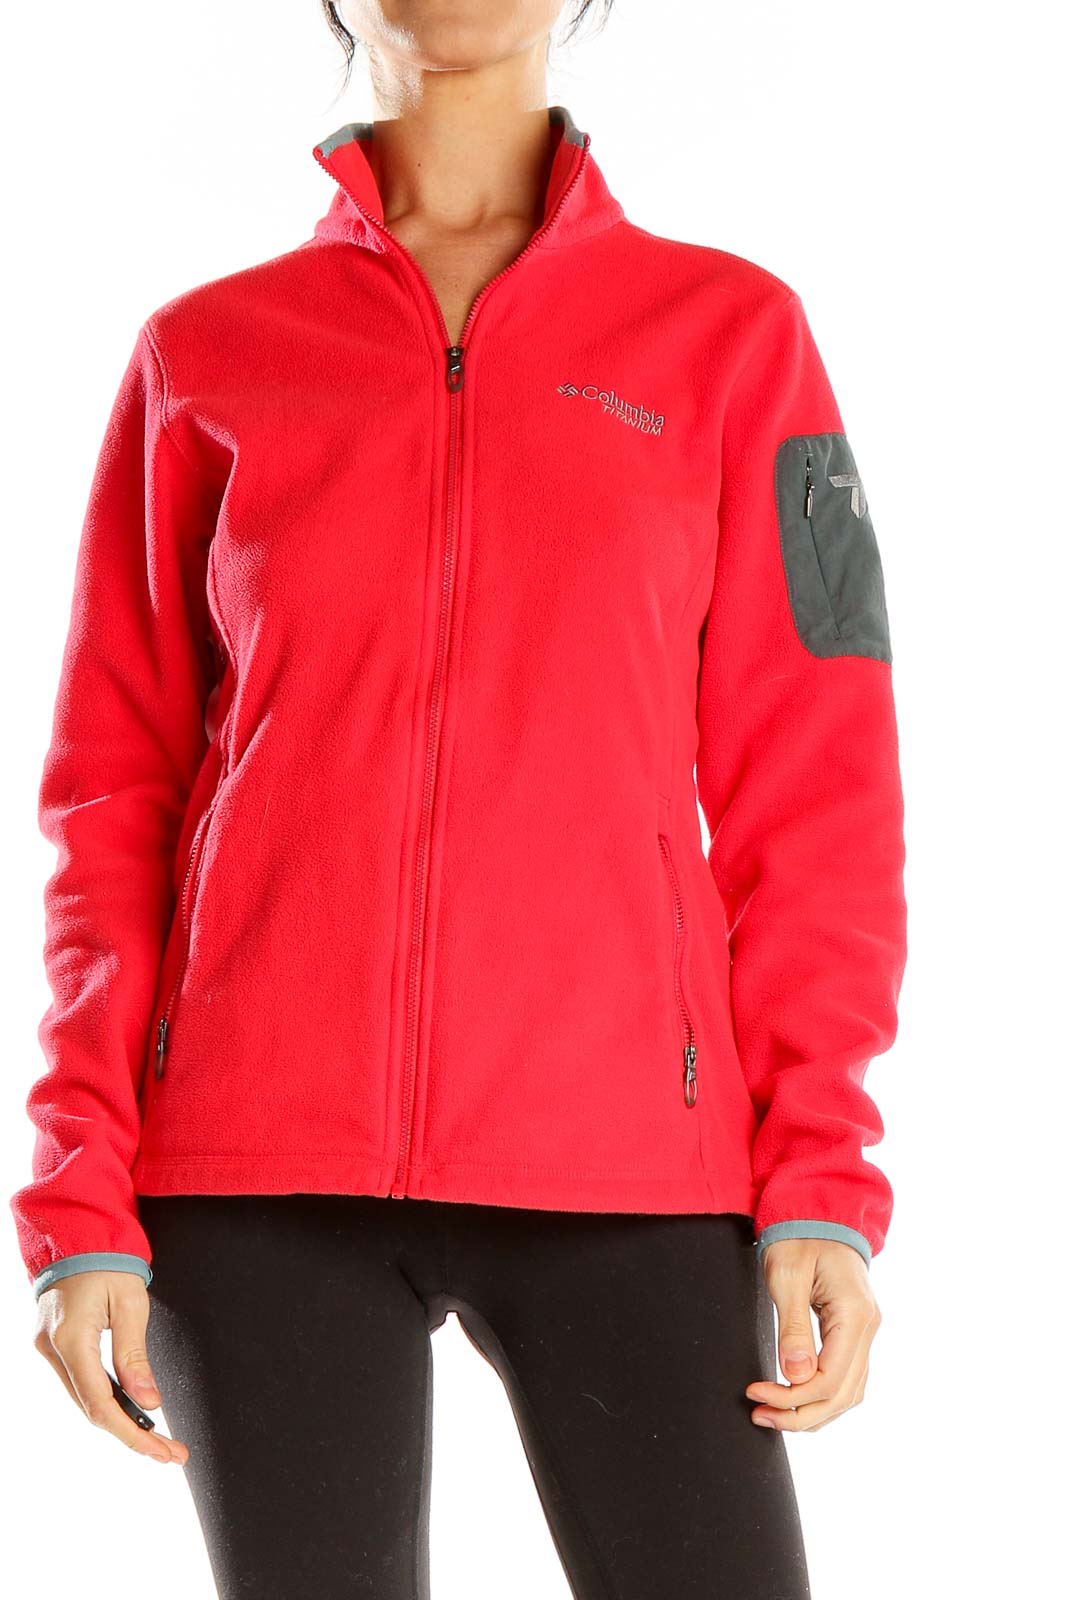 Red Sports Jacket Front